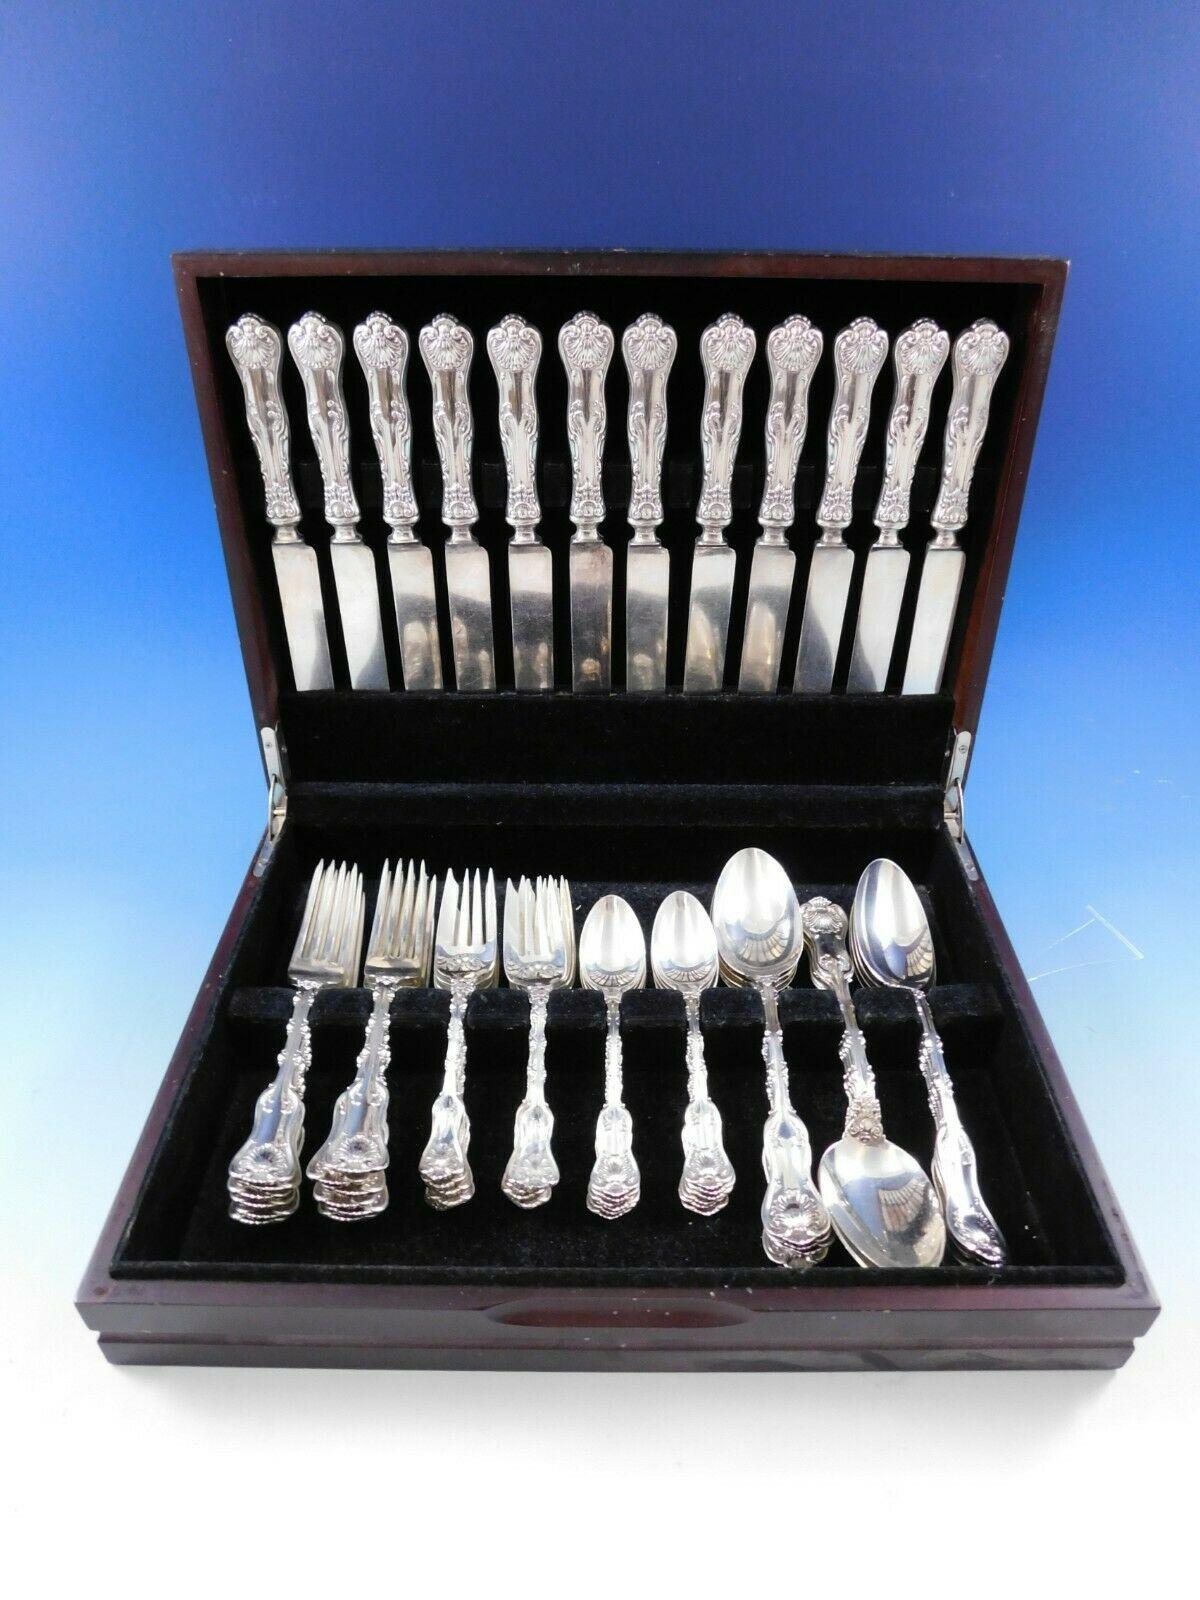 Dinner Size Imperial Queen by Whiting sterling silver flatware set with classic shell motif and fiddle shape, 60 pieces. This set includes:

12 dinner size knives with blunt plated blades, 9 1/2